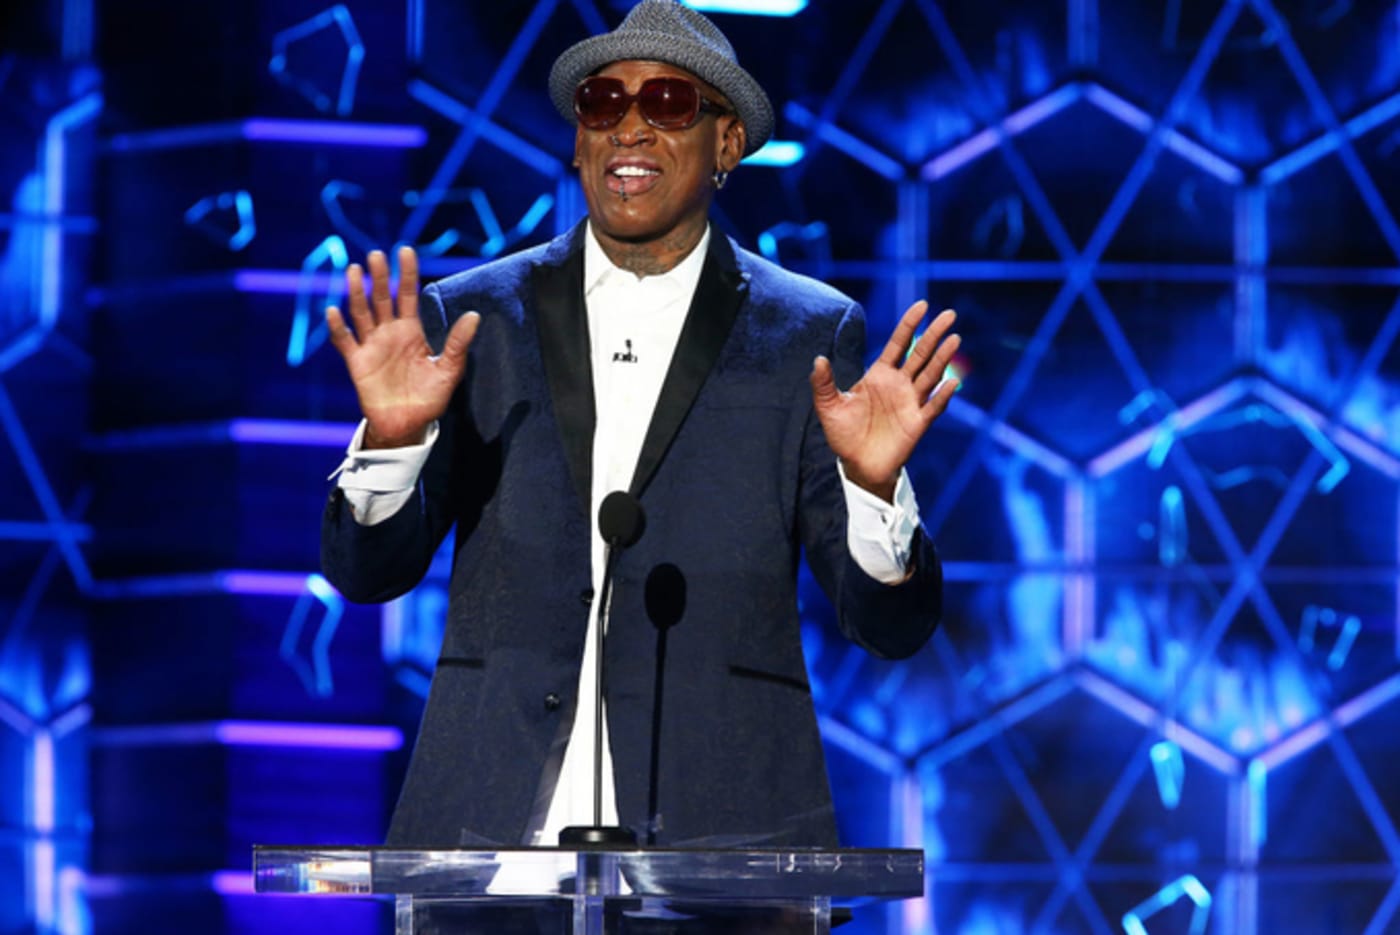 Dennis Rodman attends the Comedy Central Roast Of Bruce Willis